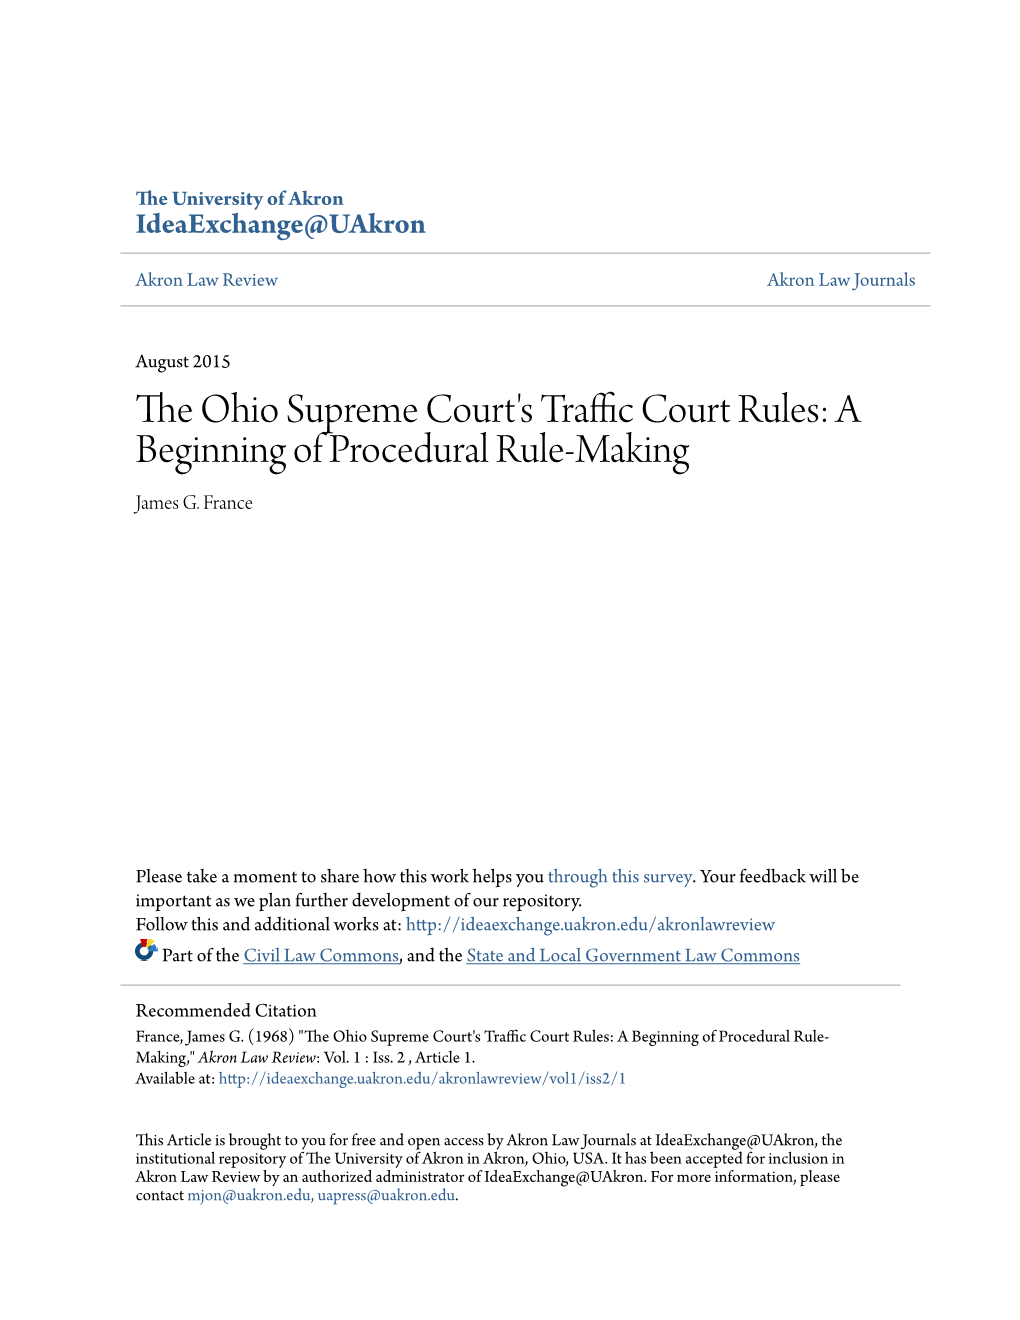 THE OHIO SUPREME COURT's TRAFFIC COURT RULES: a BEGINNING of PROCEDURAL RULE-MAKING by Professor James G